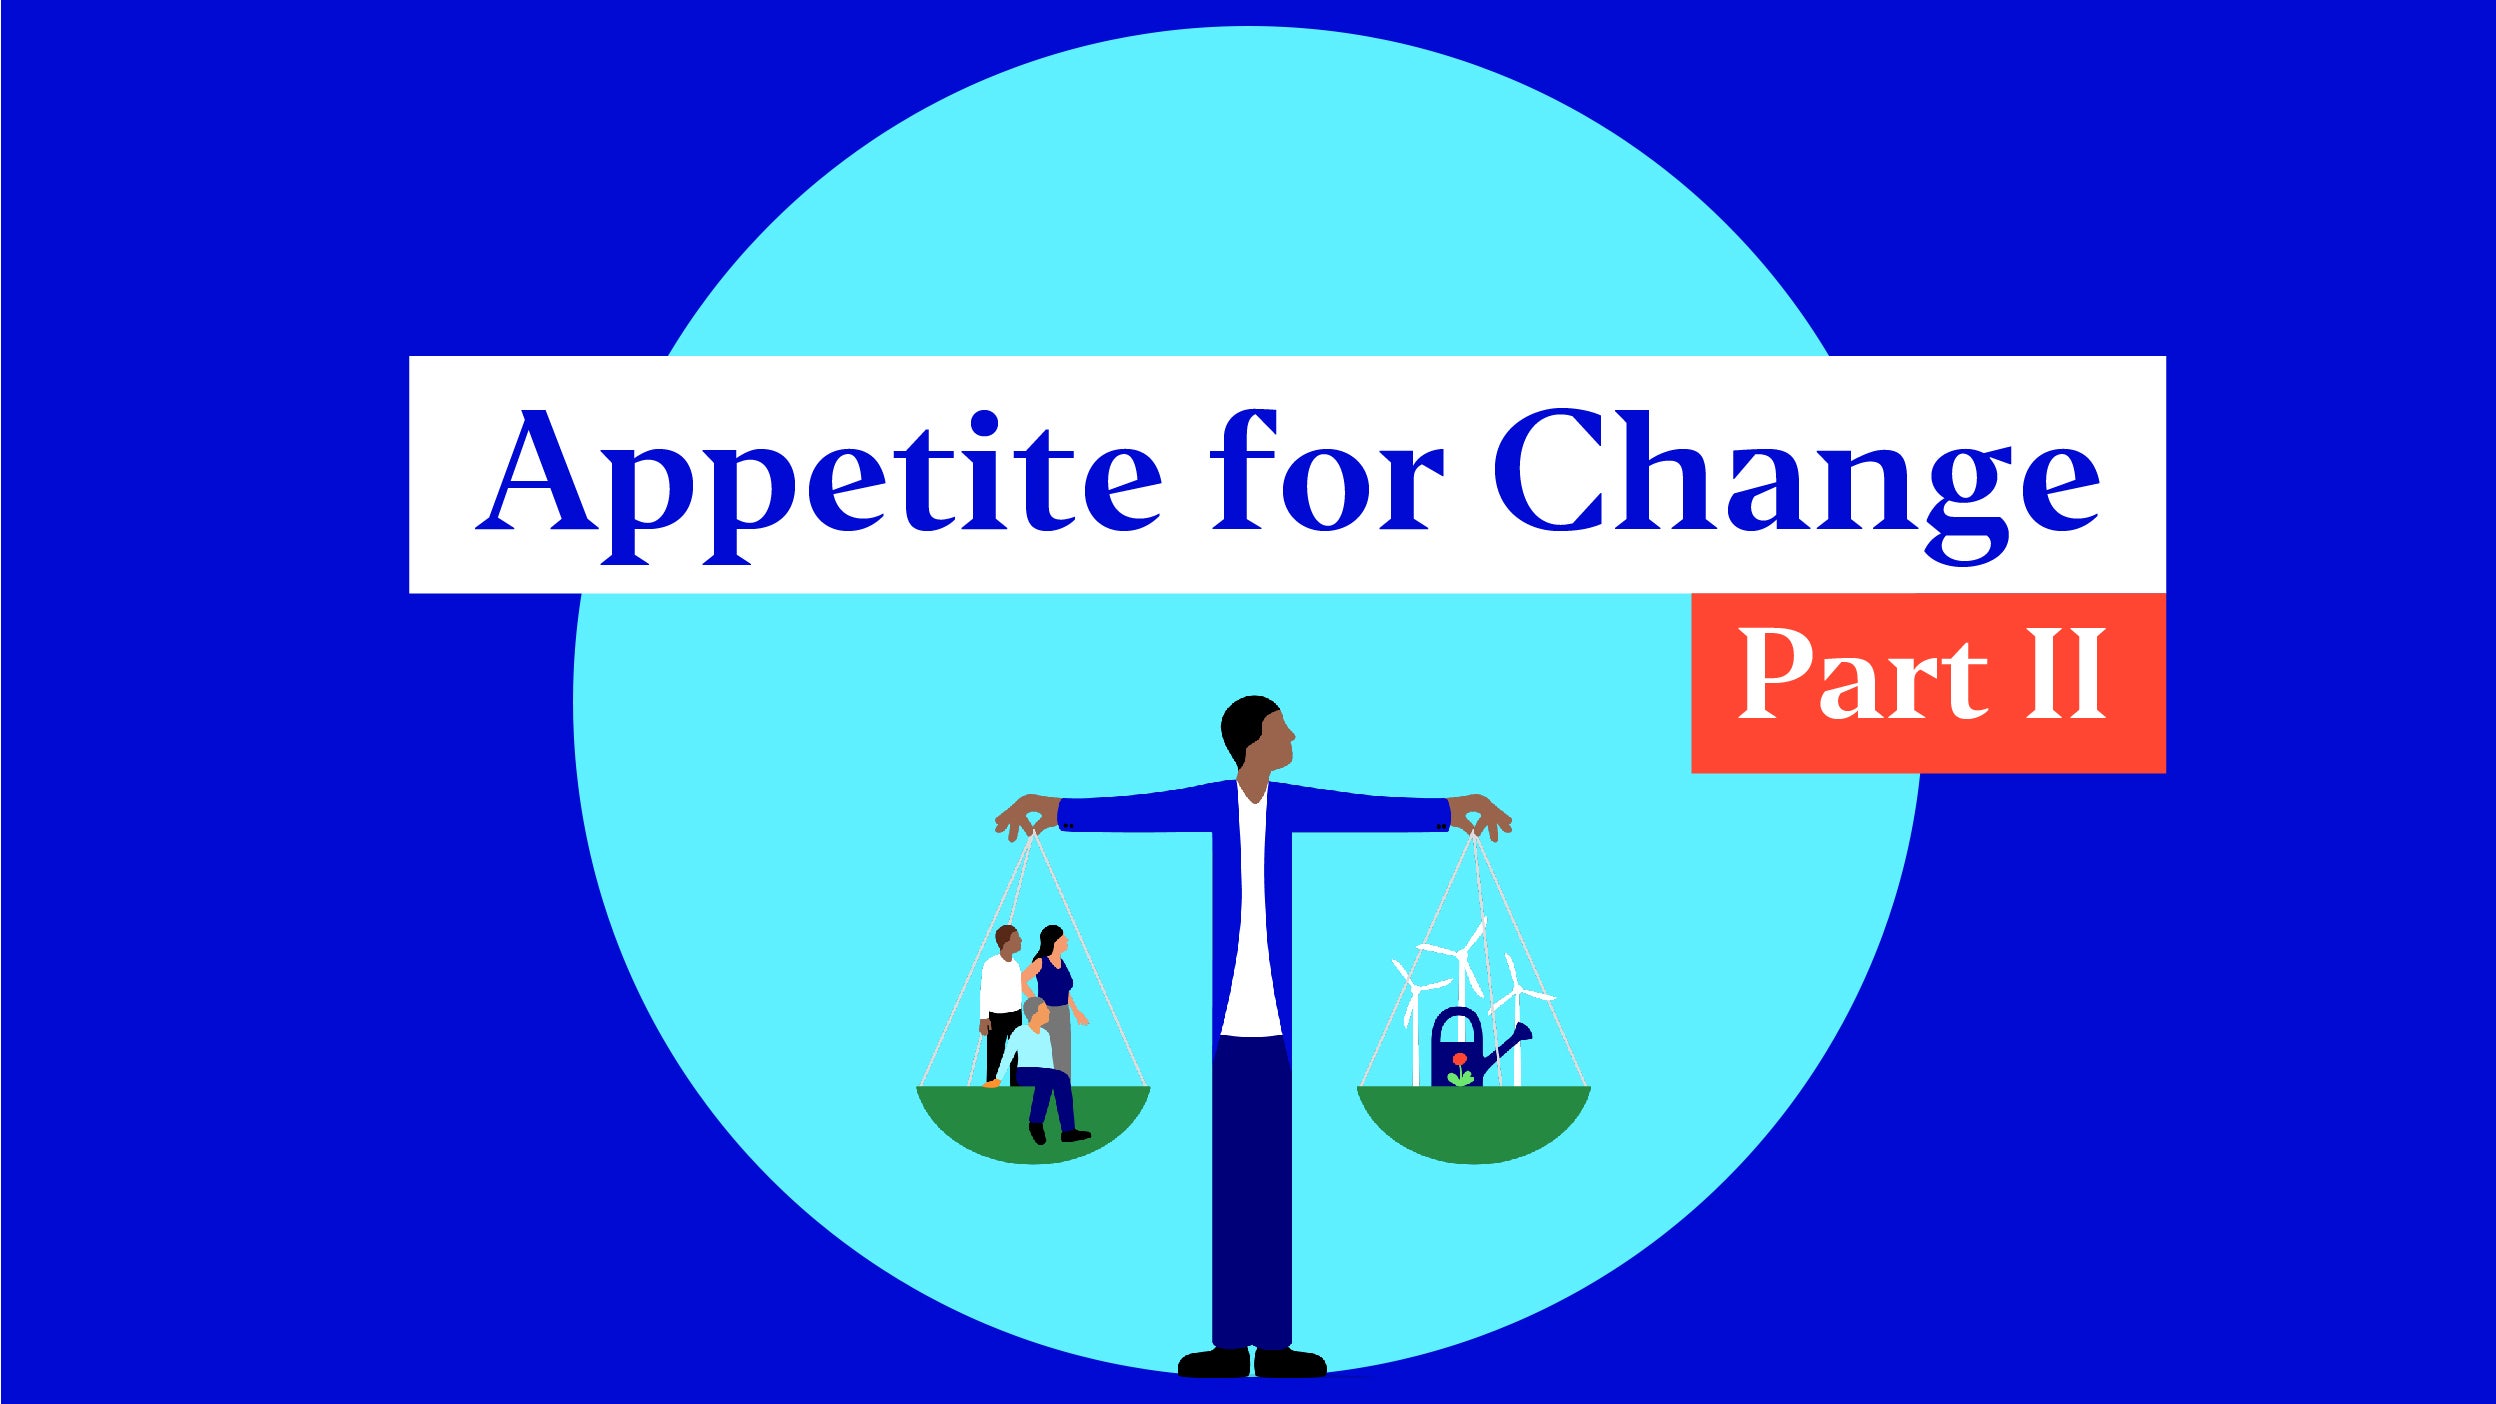 Appetite for Change Part II: The search for sustainability